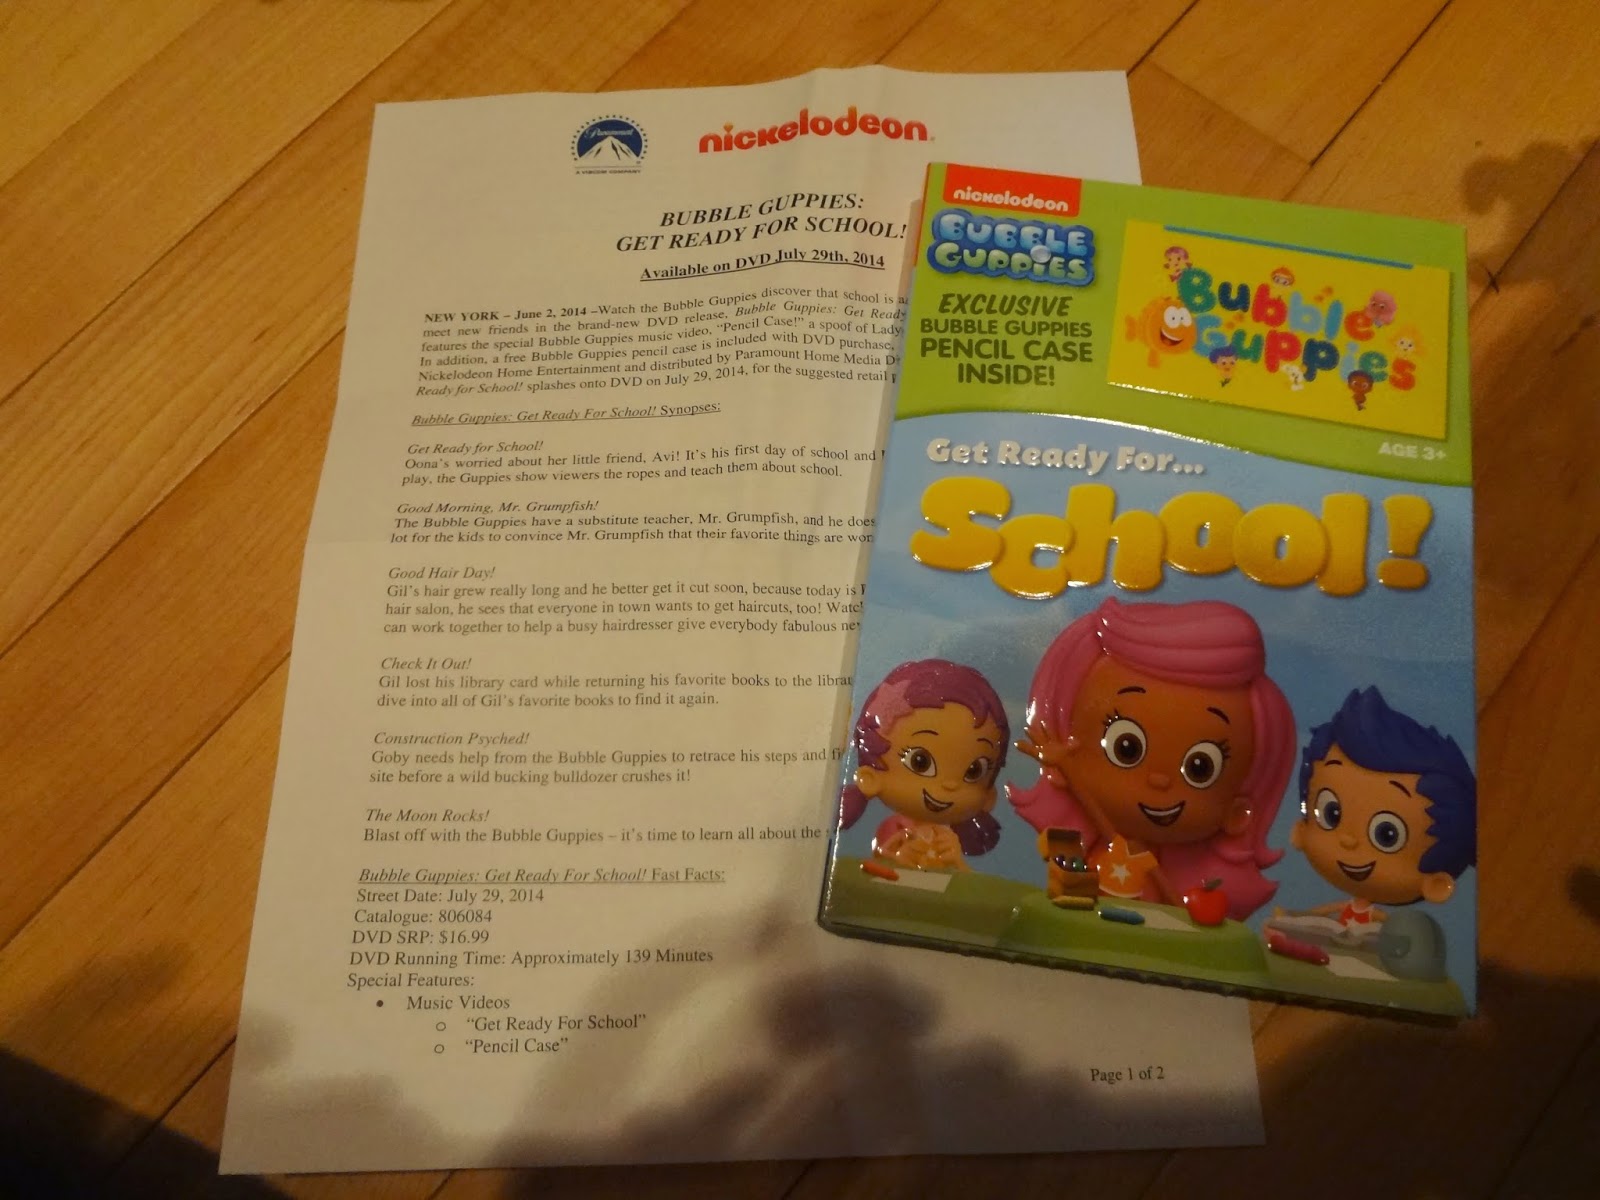 Bubble Guppies Get Ready For School Dvd Review And Giveaway Mommy S Block Party